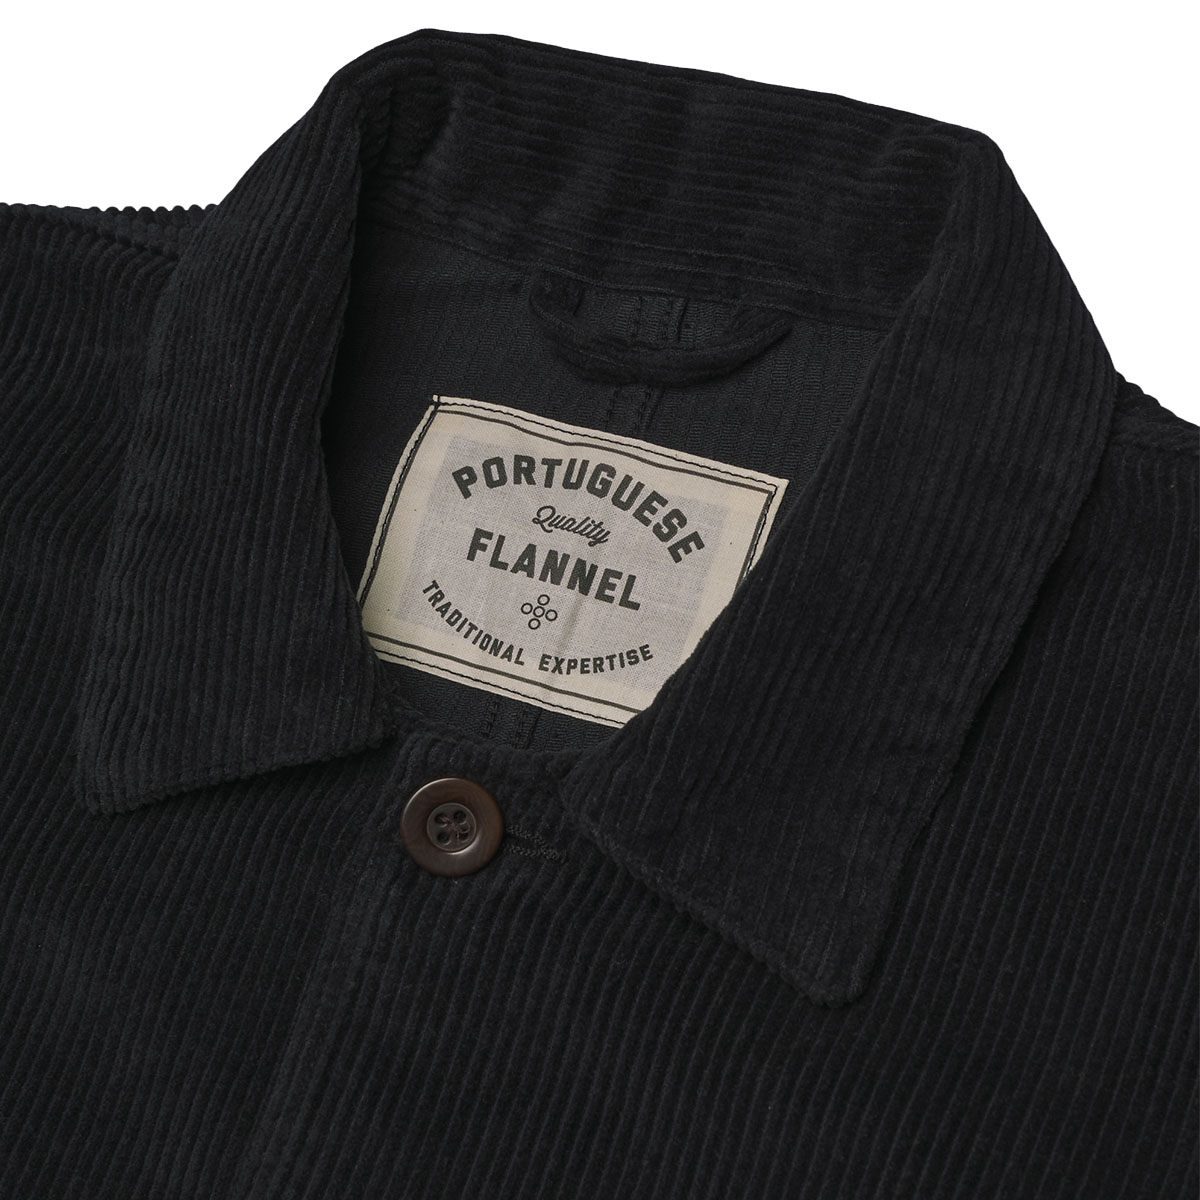 Portuguese Flannel Labura Cotton-Corduroy Overshirt Black, made with the finest exclusive fabrics